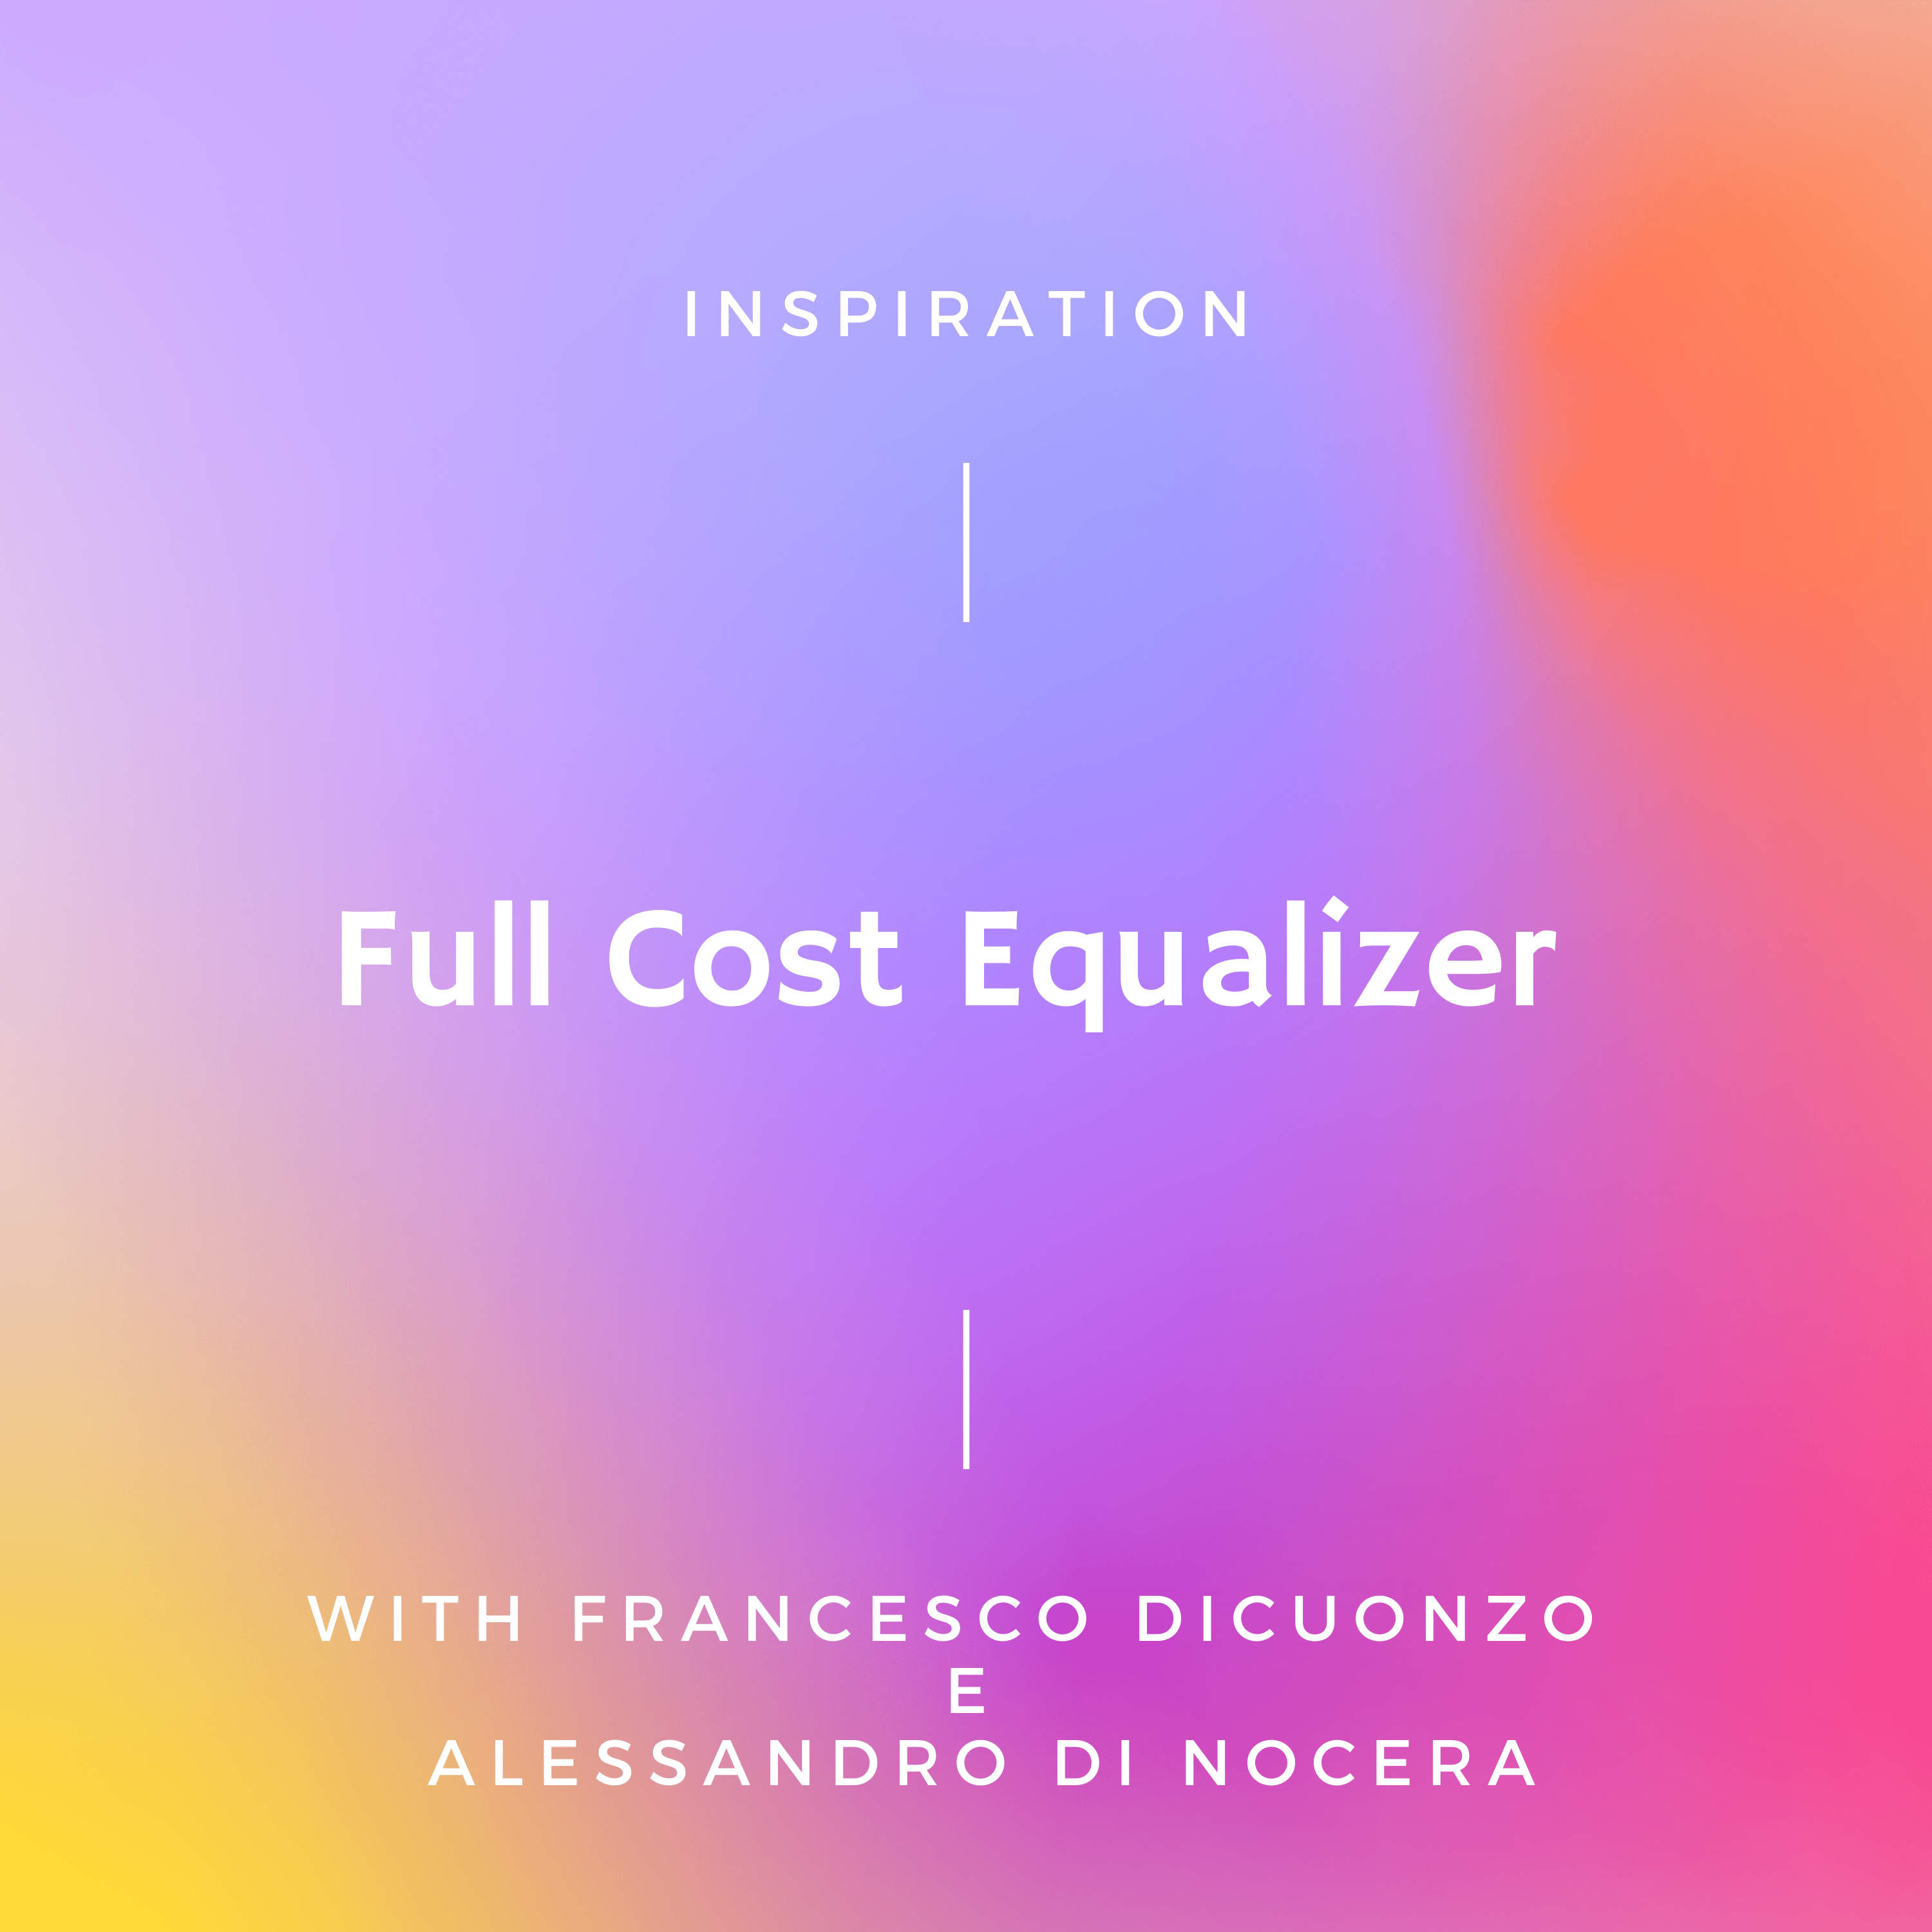 Full Cost Equalizer